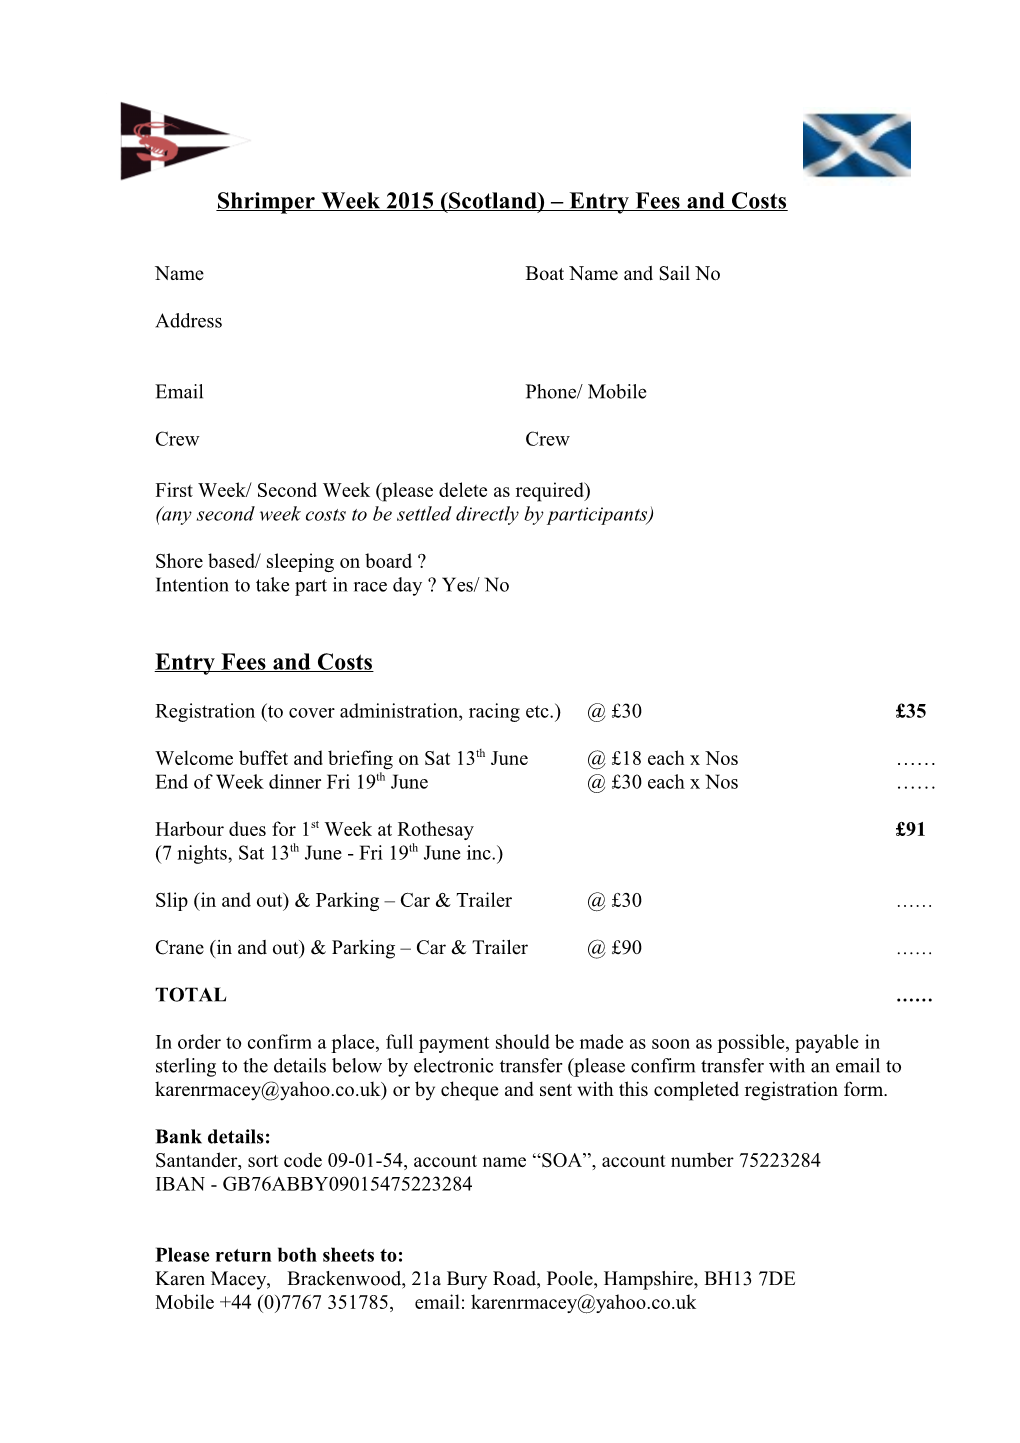 Shrimper Week 2015 (Scotland) Entry Fees and Costs